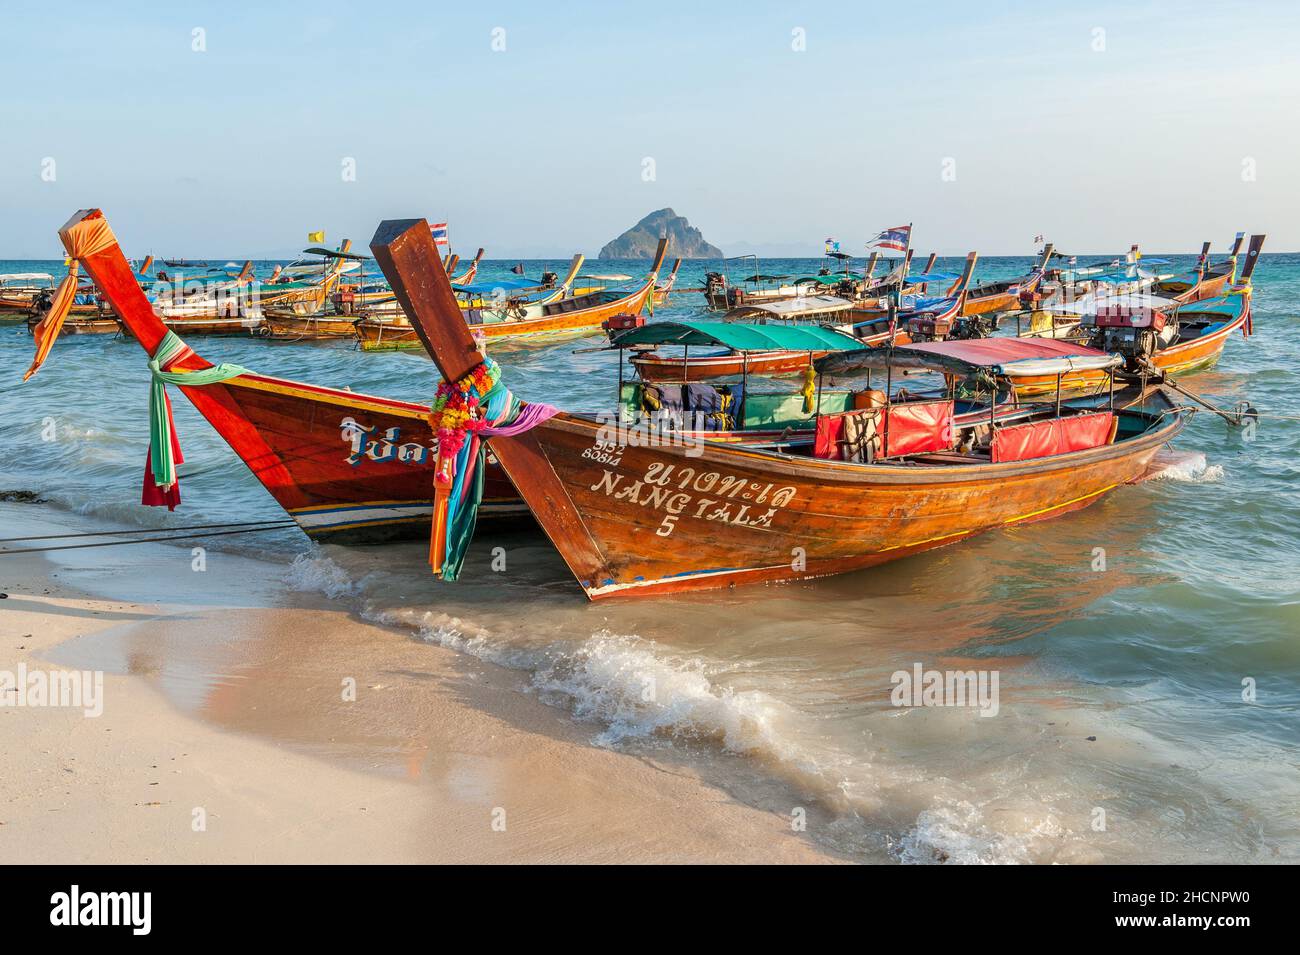 Longtail boats at Laem Tong Beach on Phi Phi Islands. These tropical islands are a popular tour destination from Phuket and Krabi in Thailand. Stock Photo